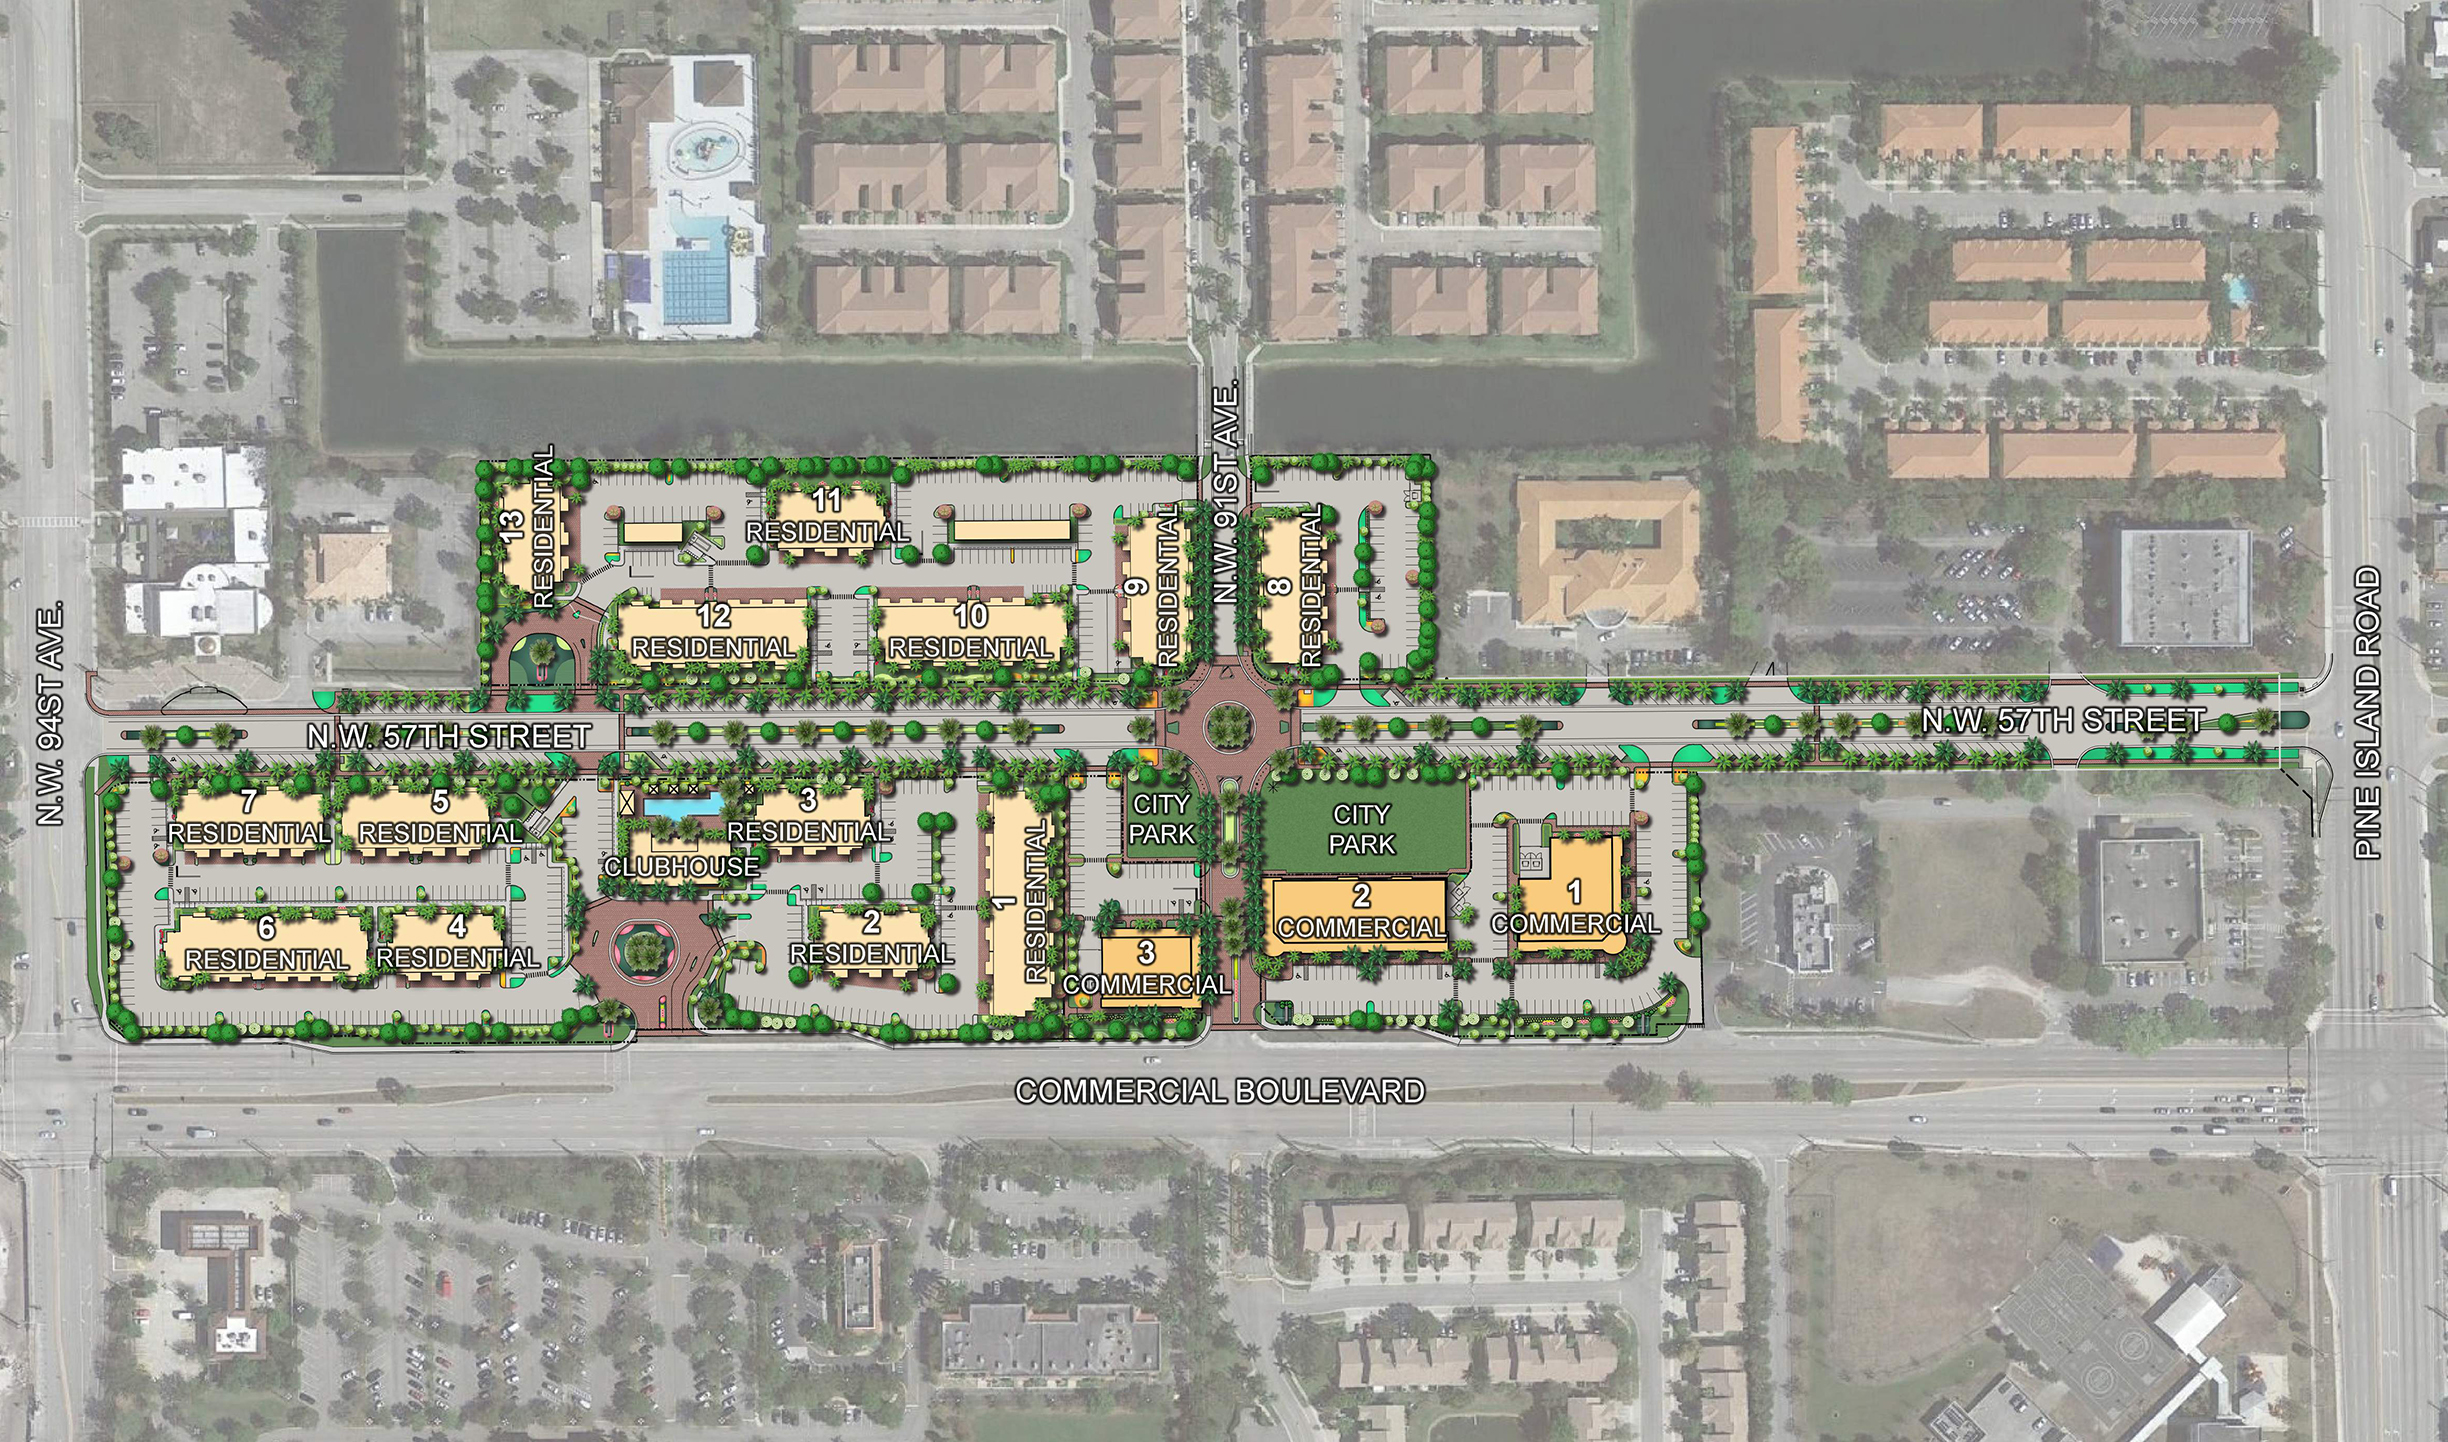 Tamarac to Sign Agreement for Village Project